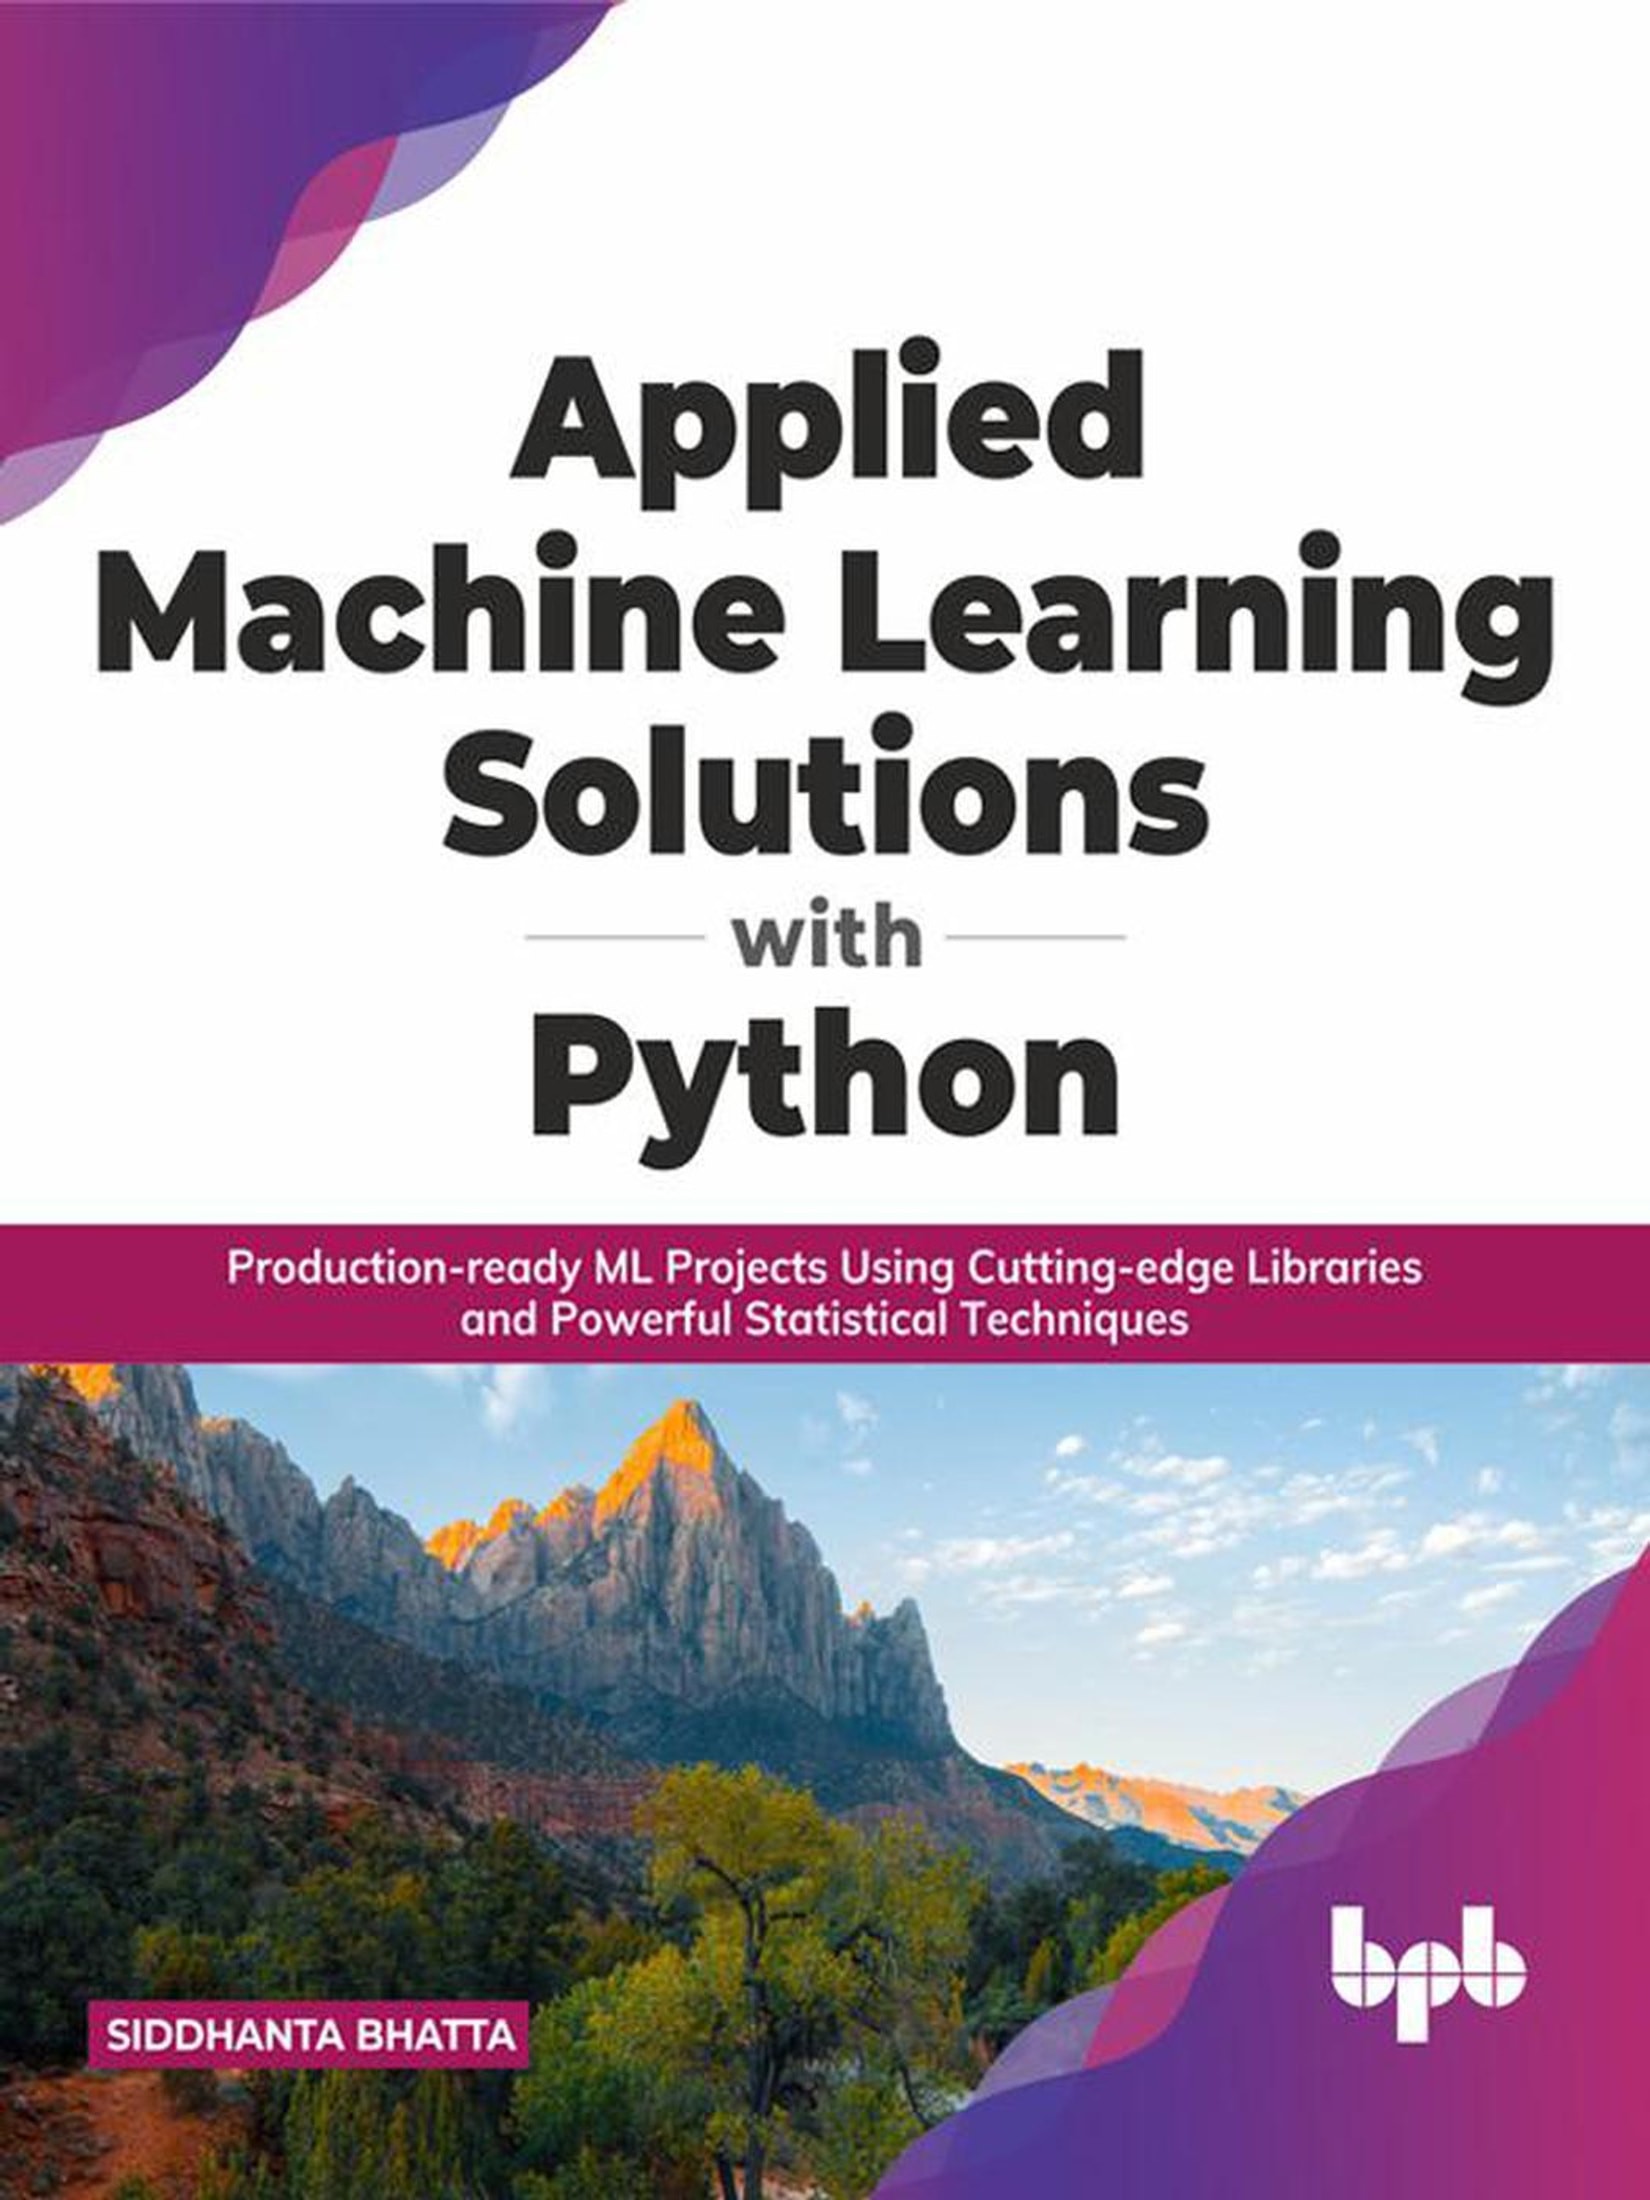 Applied Machine Learning Solutions with Python: Production-ready ML Projects Using Cutting-edge Libraries and Powerful Statistical Techniques (English Edition)